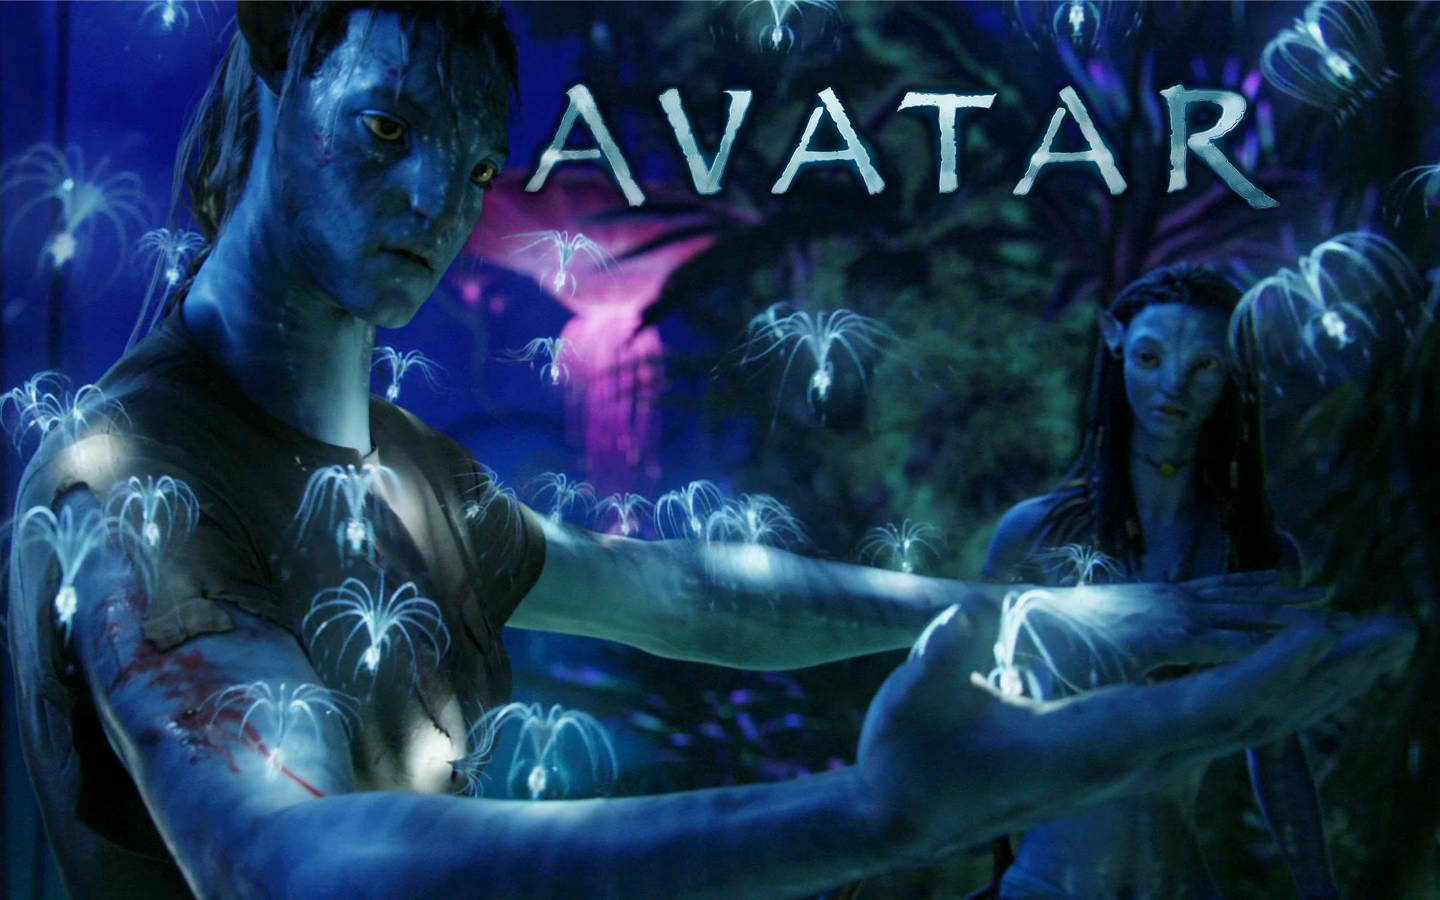 Download All Movie The Most Popular Film Avatar